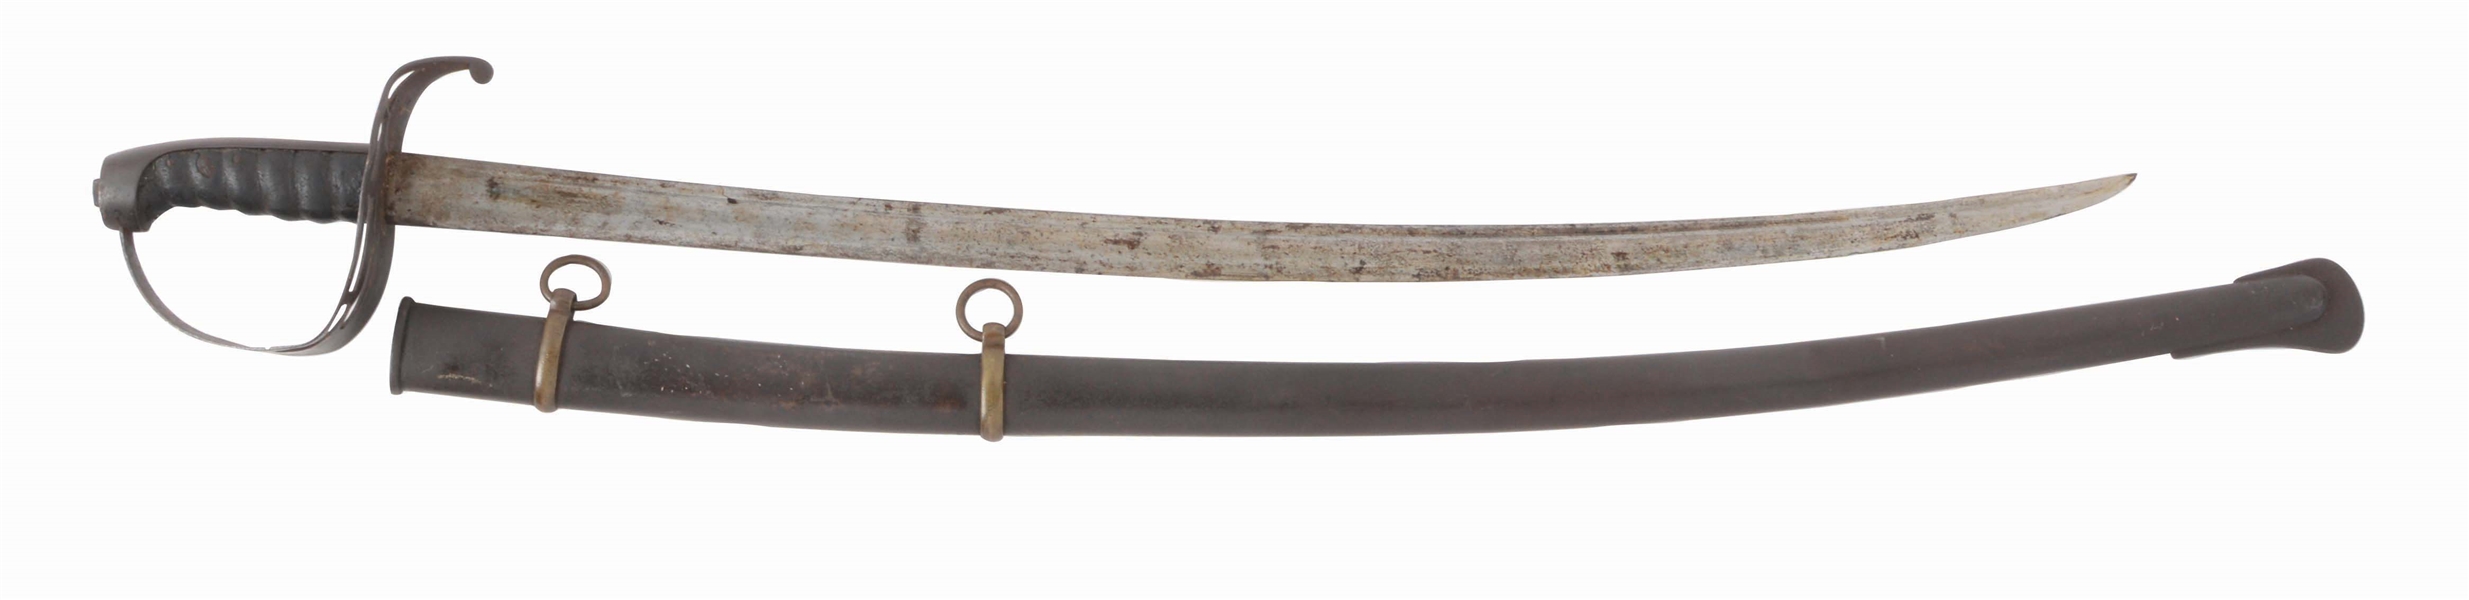 RARE REGIMENTALLY MARKED AND CONFEDERATE ALTERED FIRST MODEL VIRGINIA MANUFACTORY CAVALRY SABER WITH SCABBARD.